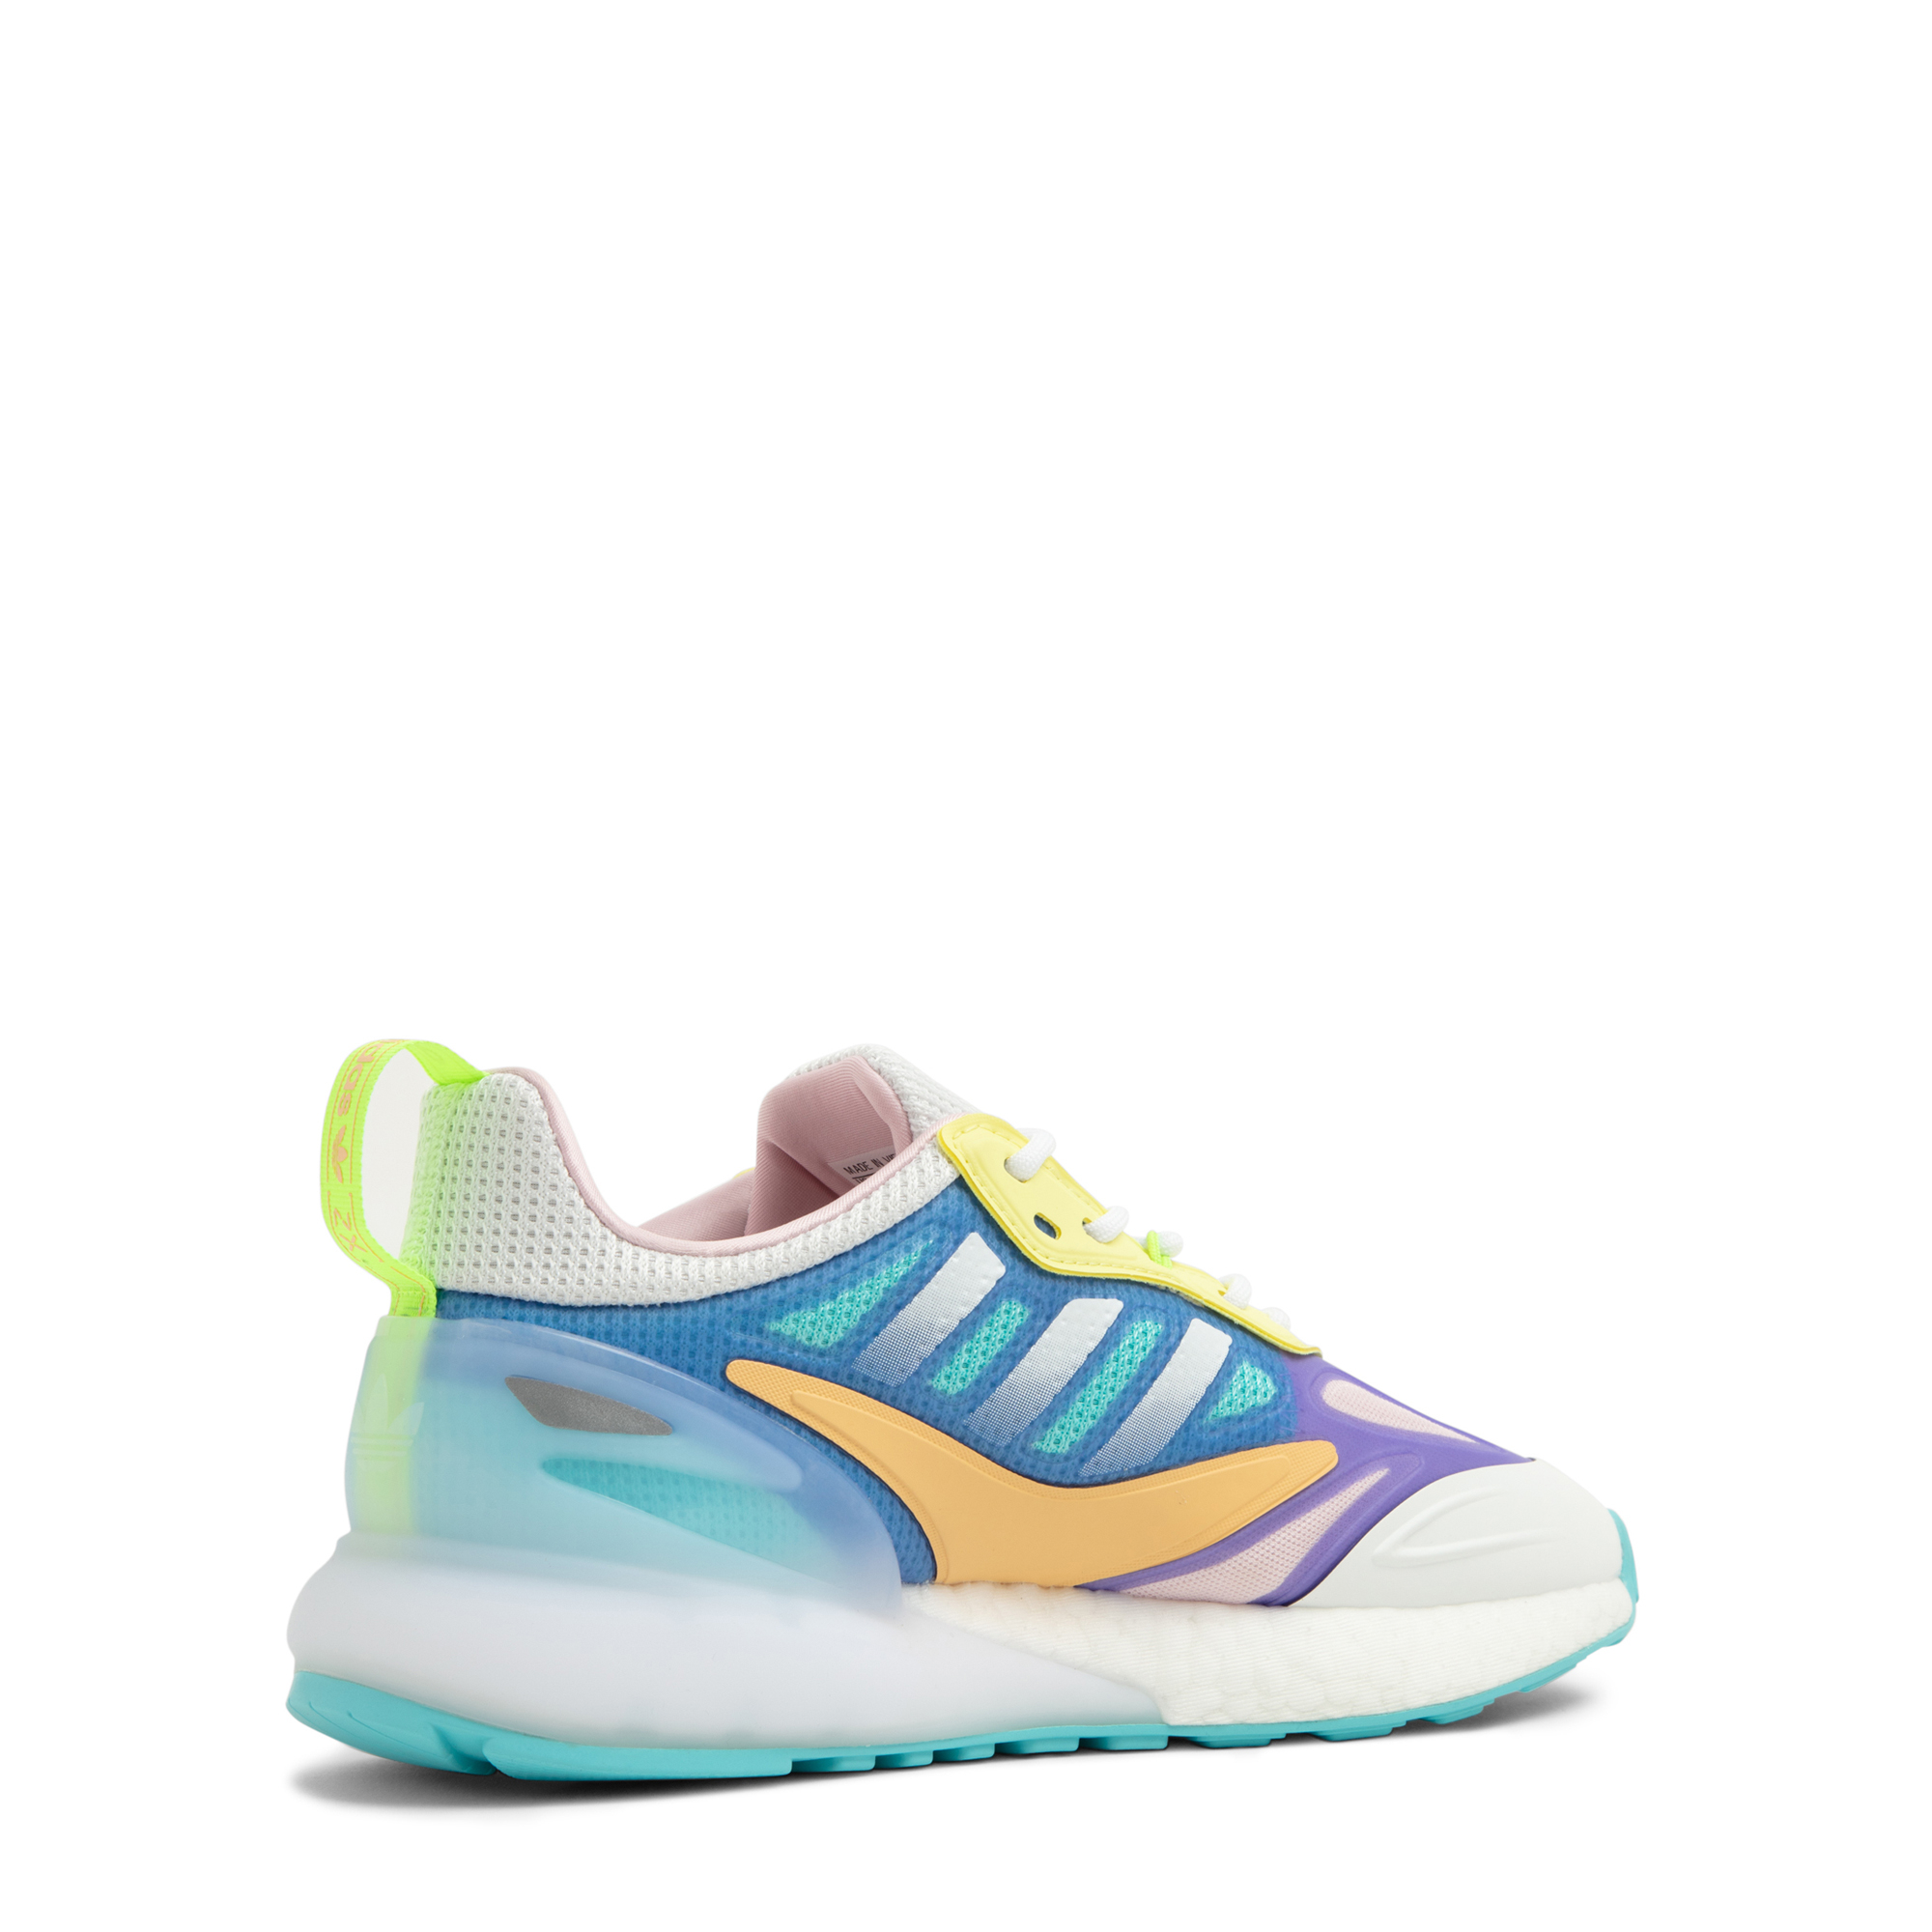 Adidas ZX 2K Boost 2.0 sneakers for Girl - Multicolored in UAE 